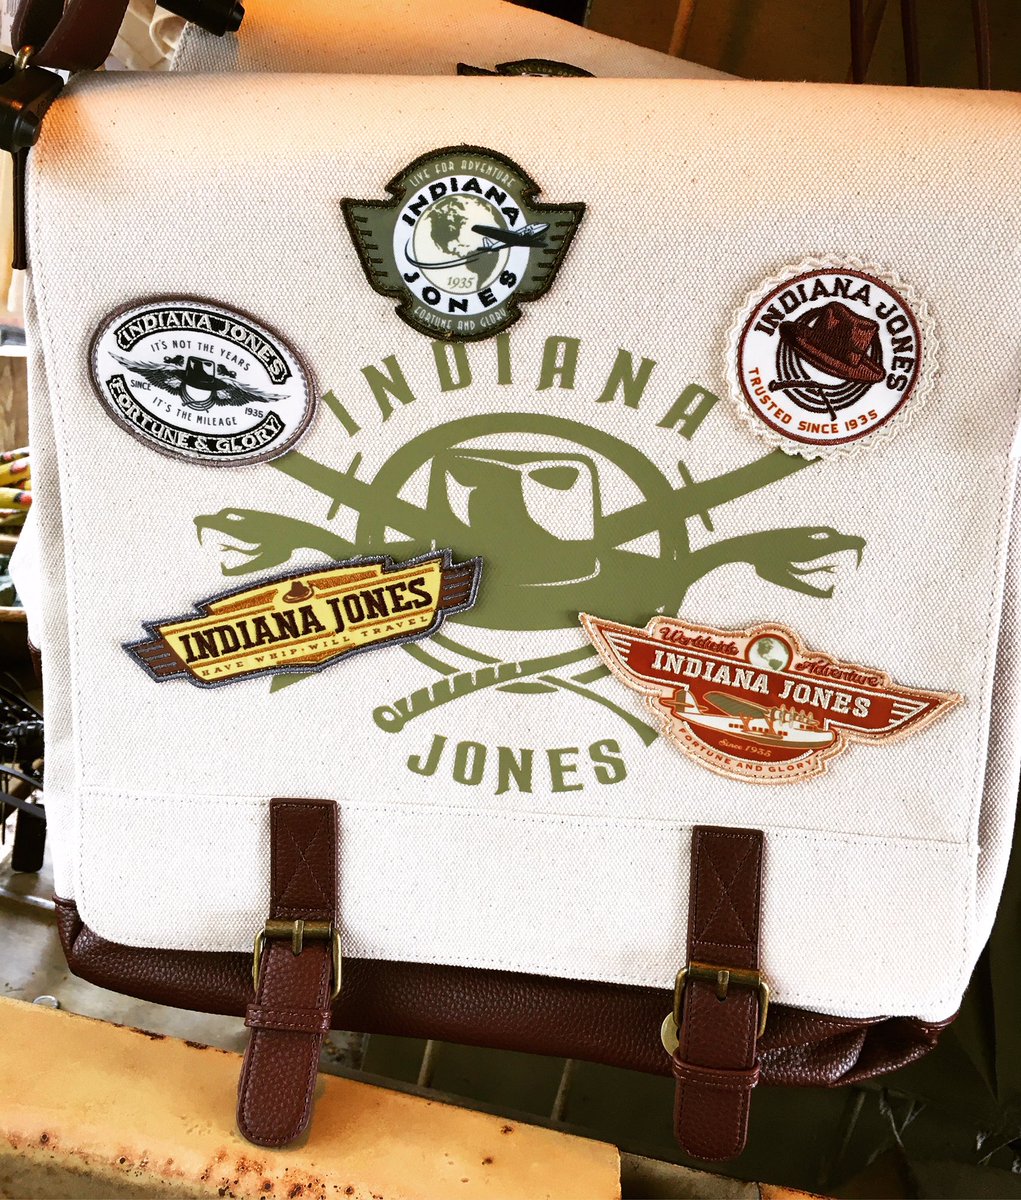 Check out this awesome shoulder bag I found at the Indiana Jones shop in Disney’s Hollywood Studios!
.
#wdw #waltdisneyworld #disneyworld #disney #hollywoodstudios #disneyshollywoodstudios #mgmstudios #partofyourstory #puremagicvacations #puremagicaydin #indianajones